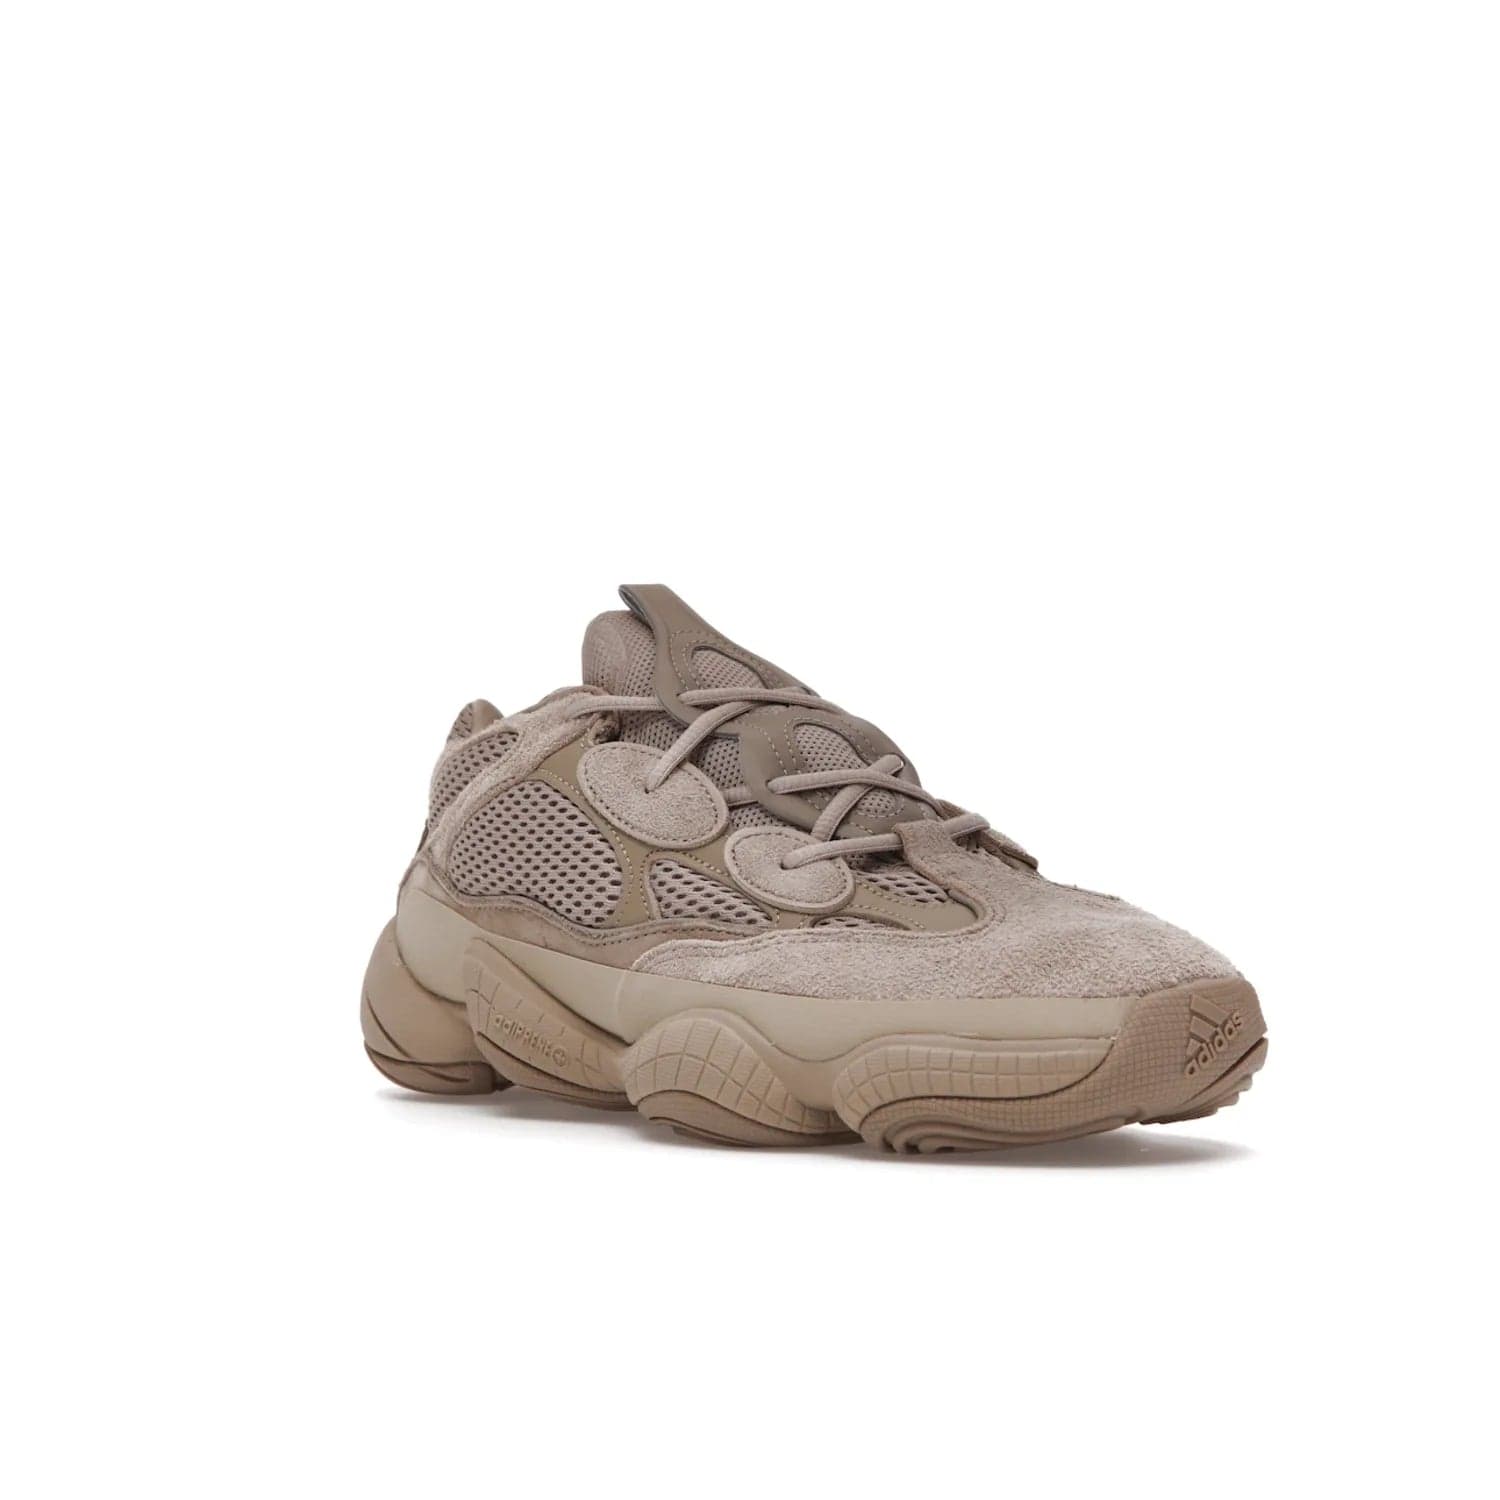 adidas Yeezy 500 Taupe Light - Image 6 - Only at www.BallersClubKickz.com - The adidas Yeezy 500 Taupe Light combines mesh, leather, and suede, with a durable adiPRENE sole for an eye-catching accessory. Reflective piping adds the perfect finishing touches to this unique silhouette. Ideal for any wardrobe, releasing in June 2021.